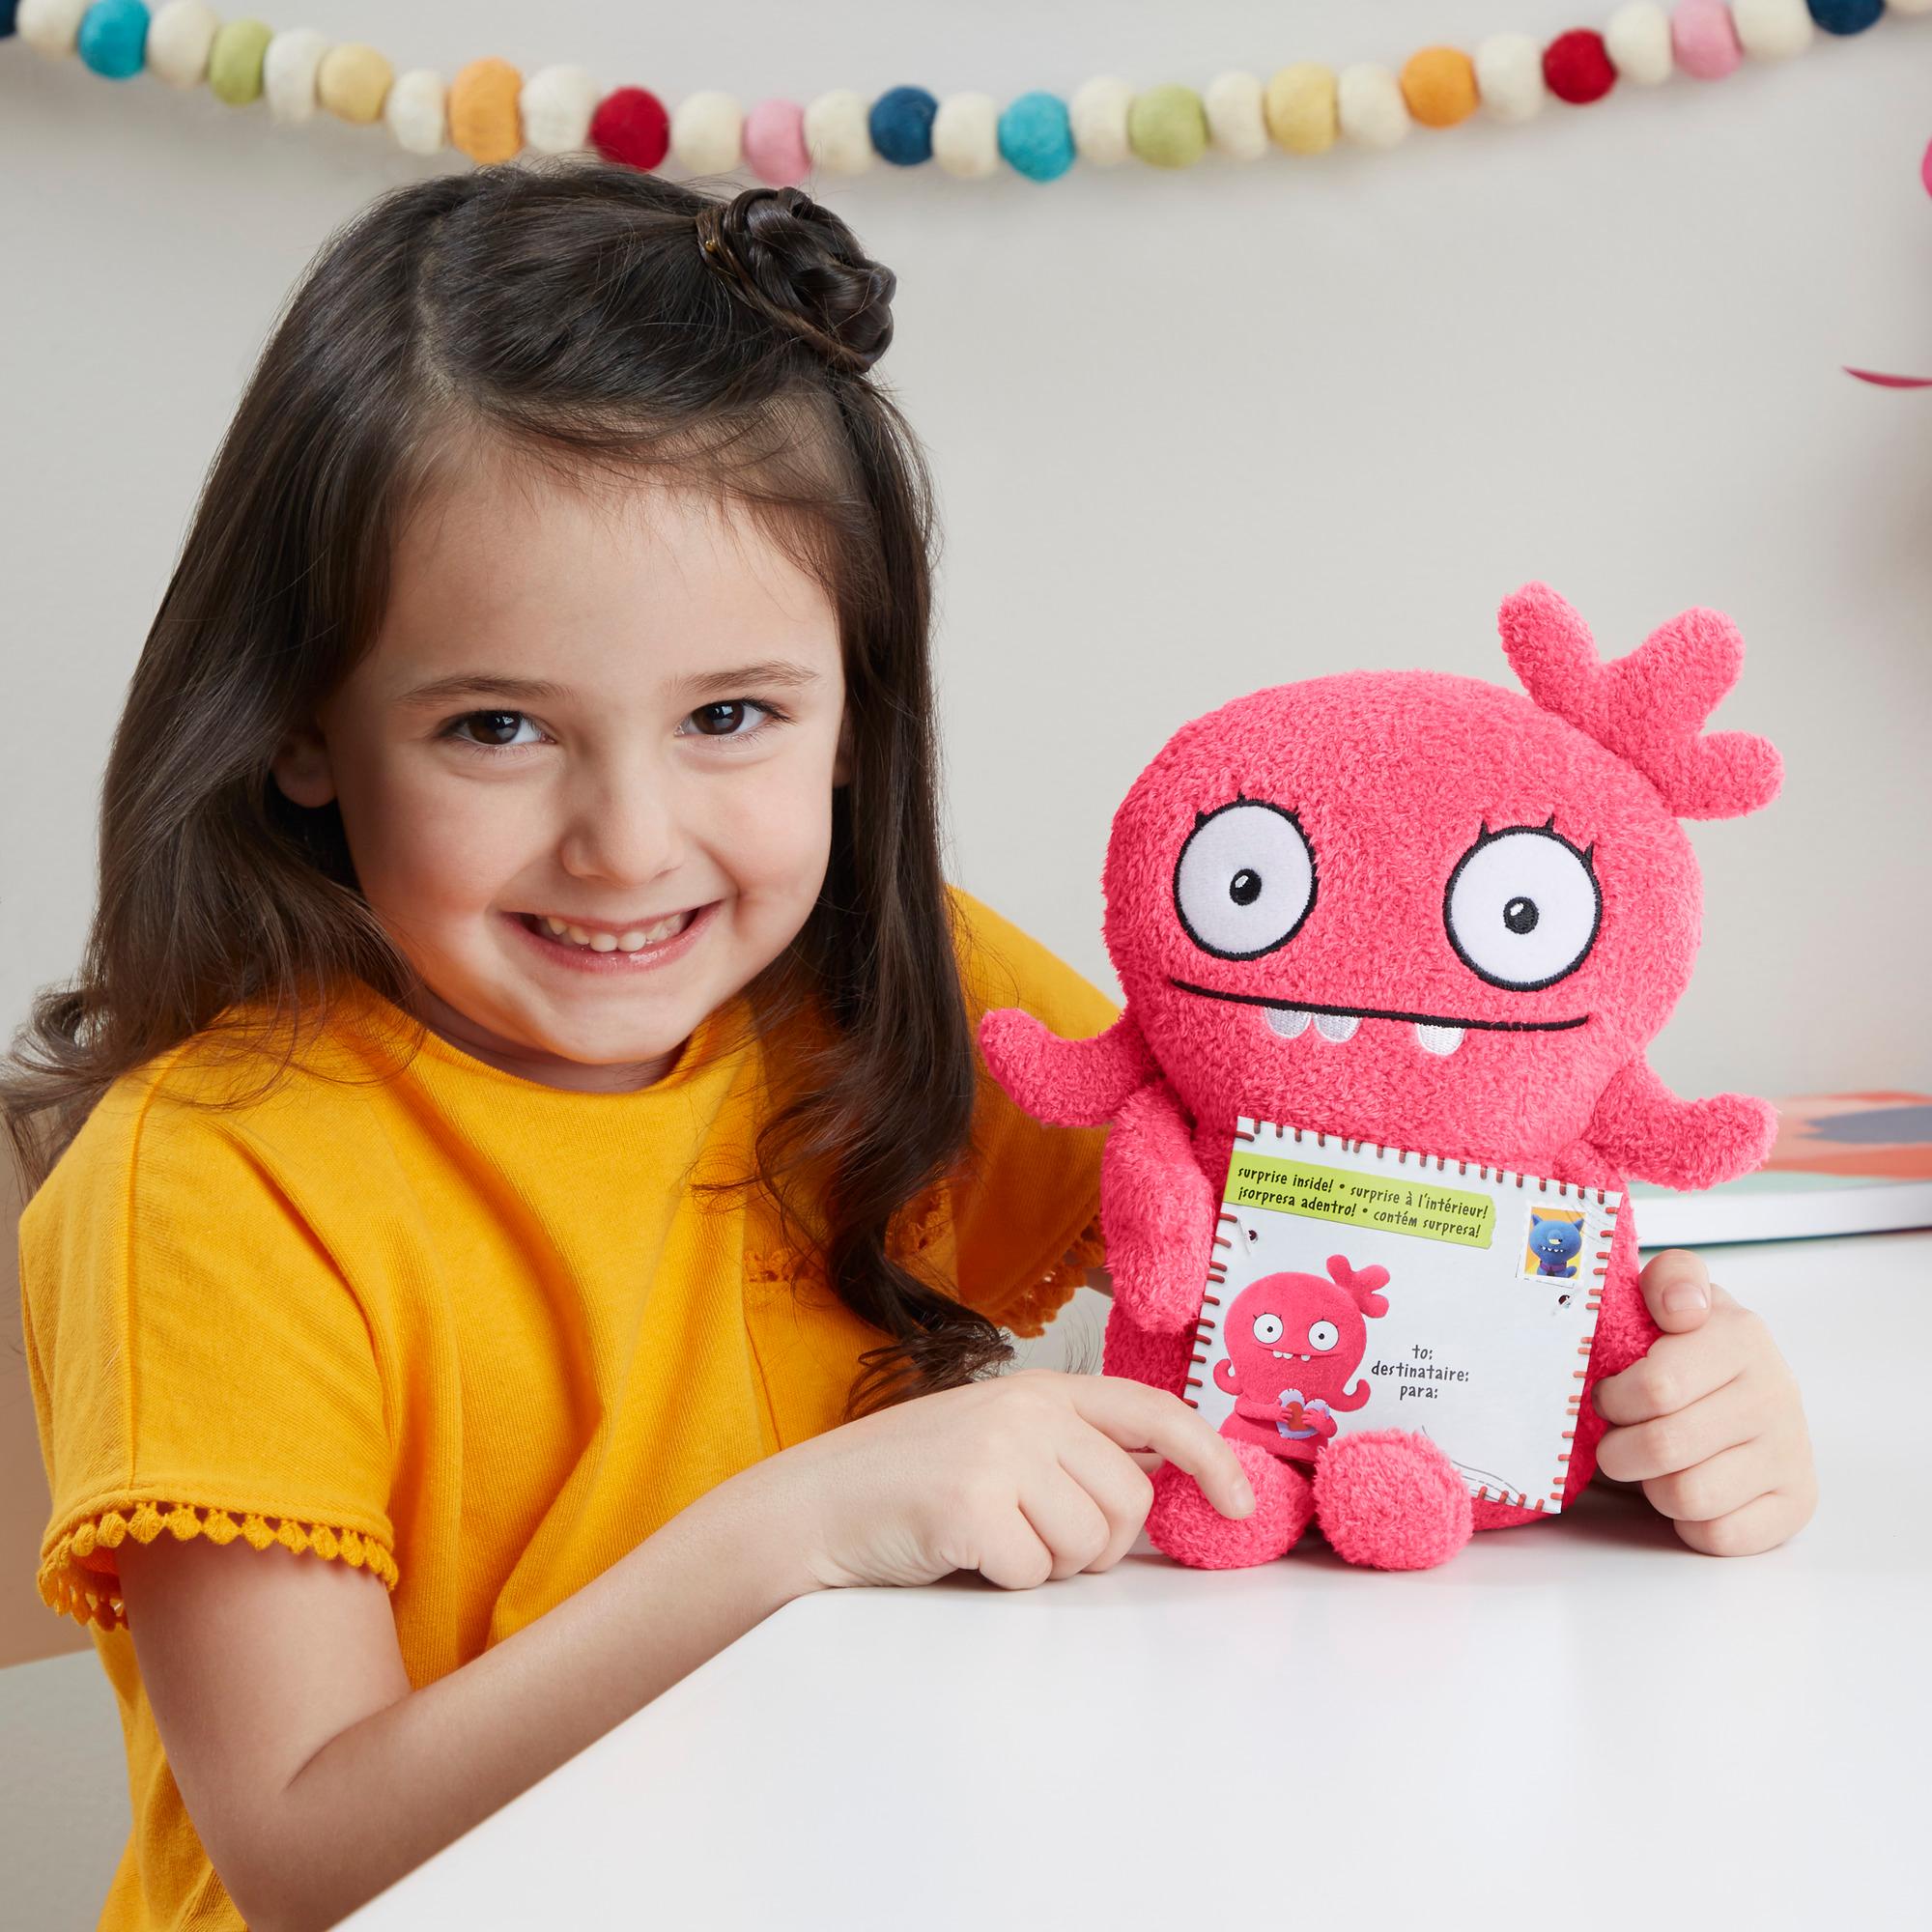 Uglydolls Yours Truly Moxy Stuffed Plush Toy 10 Inches Tall 2019 for sale online